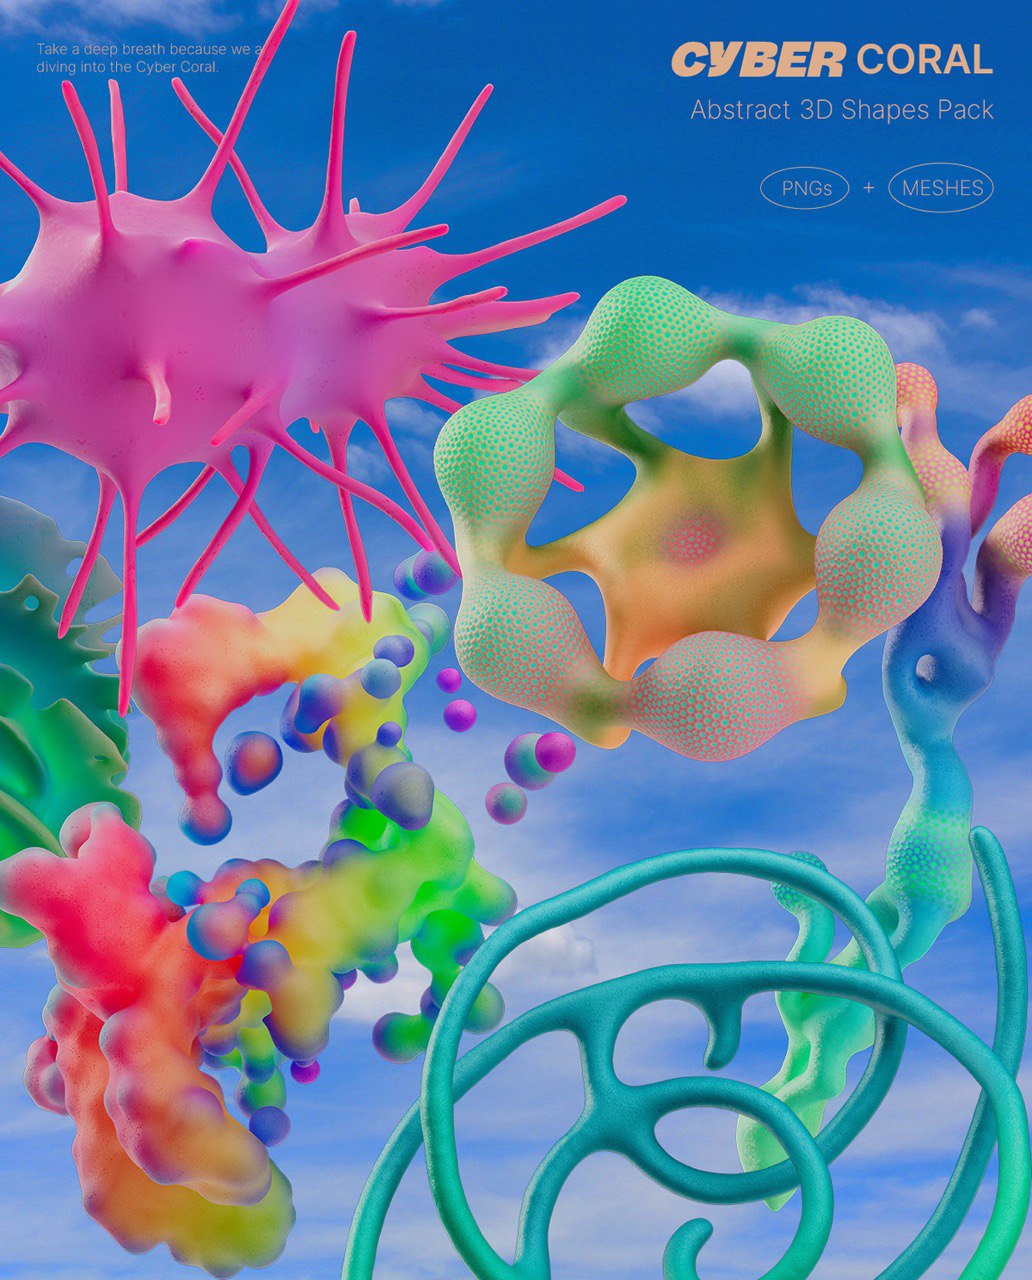 Cyber Coral Abstract 3D Shapes Pack 144 Pieces rendition image